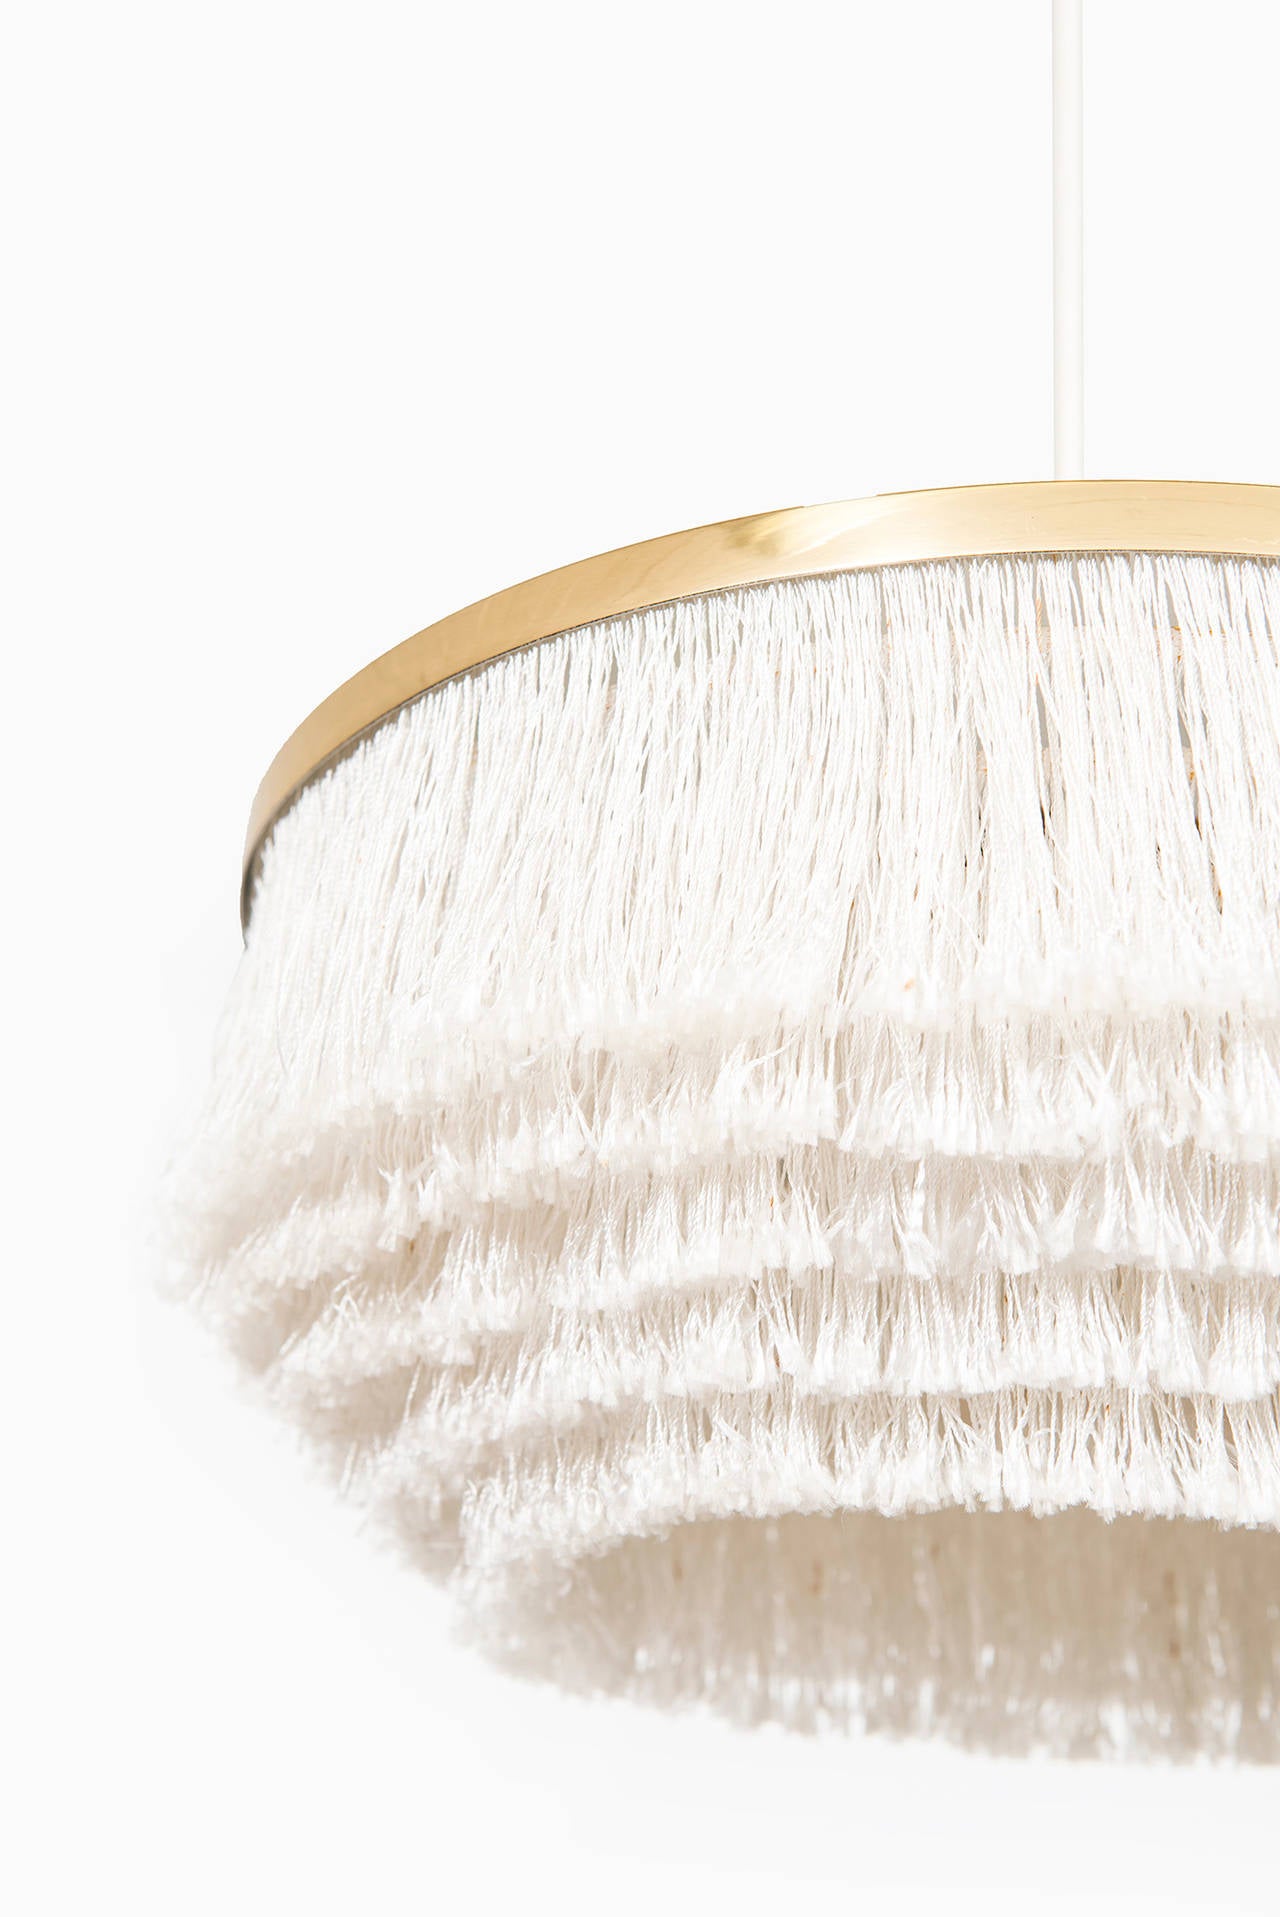 Ceiling lamp in brass and white fabric designed by Hans-Agne Jakobsson. Produced by Hans-Agne Jakobsson in Markaryd, Sweden.